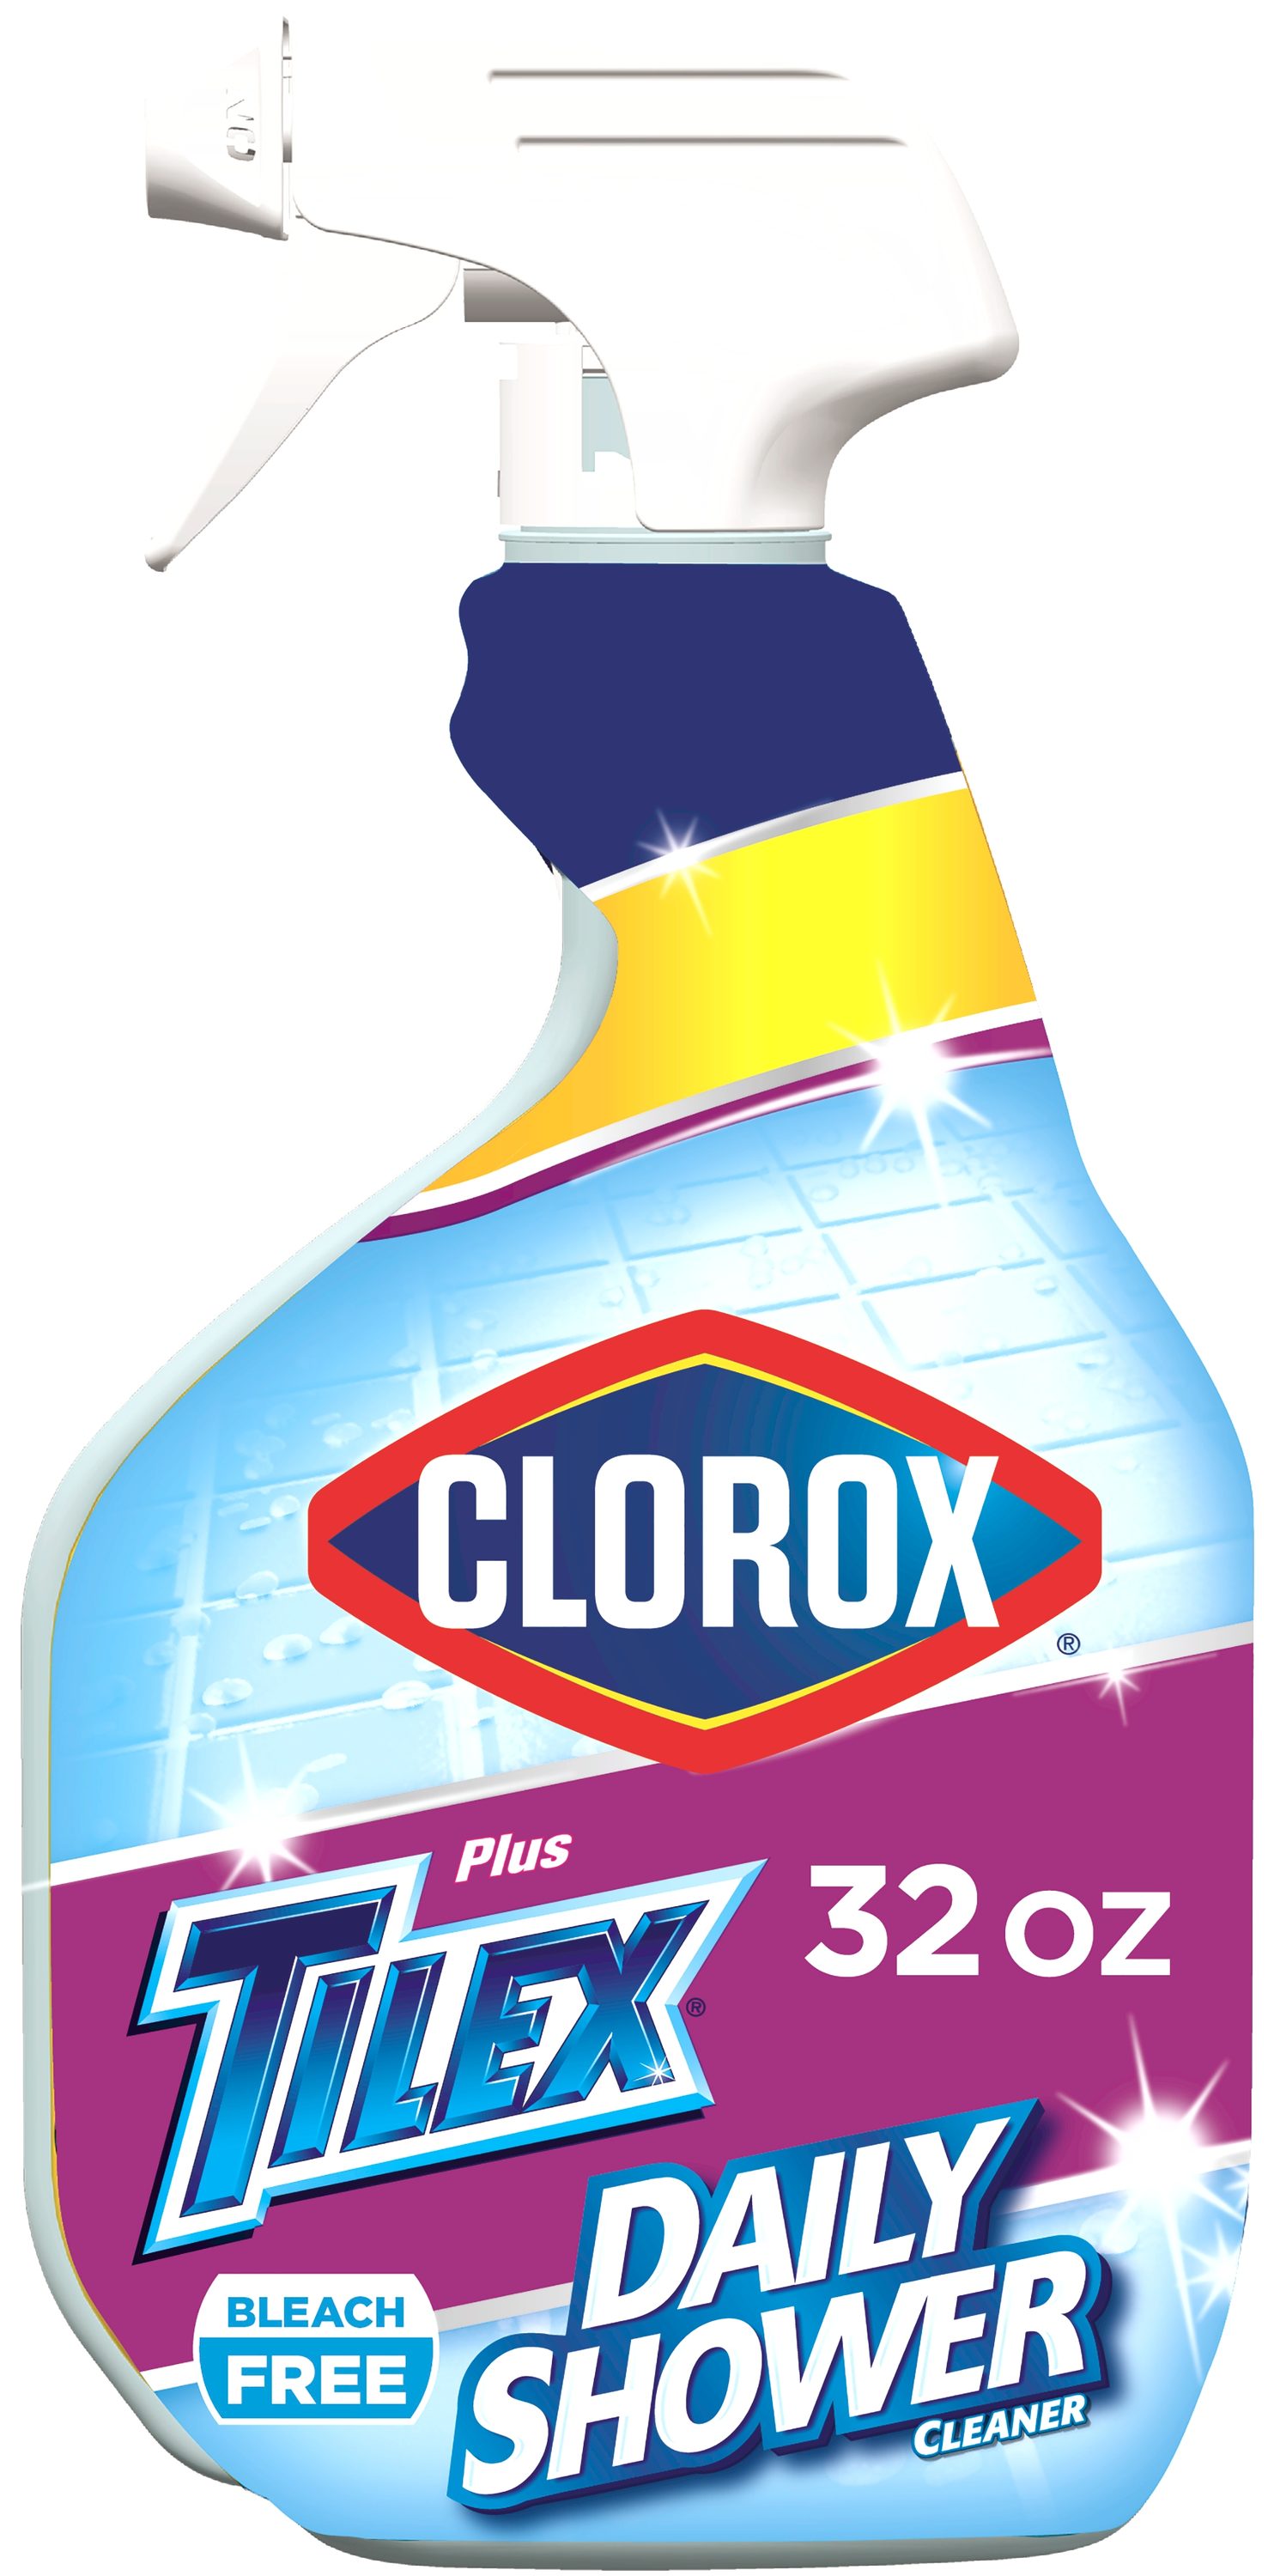 Clorox Plus Tilex Daily Shower Cleaner 32-oz in the Grout Cleaners